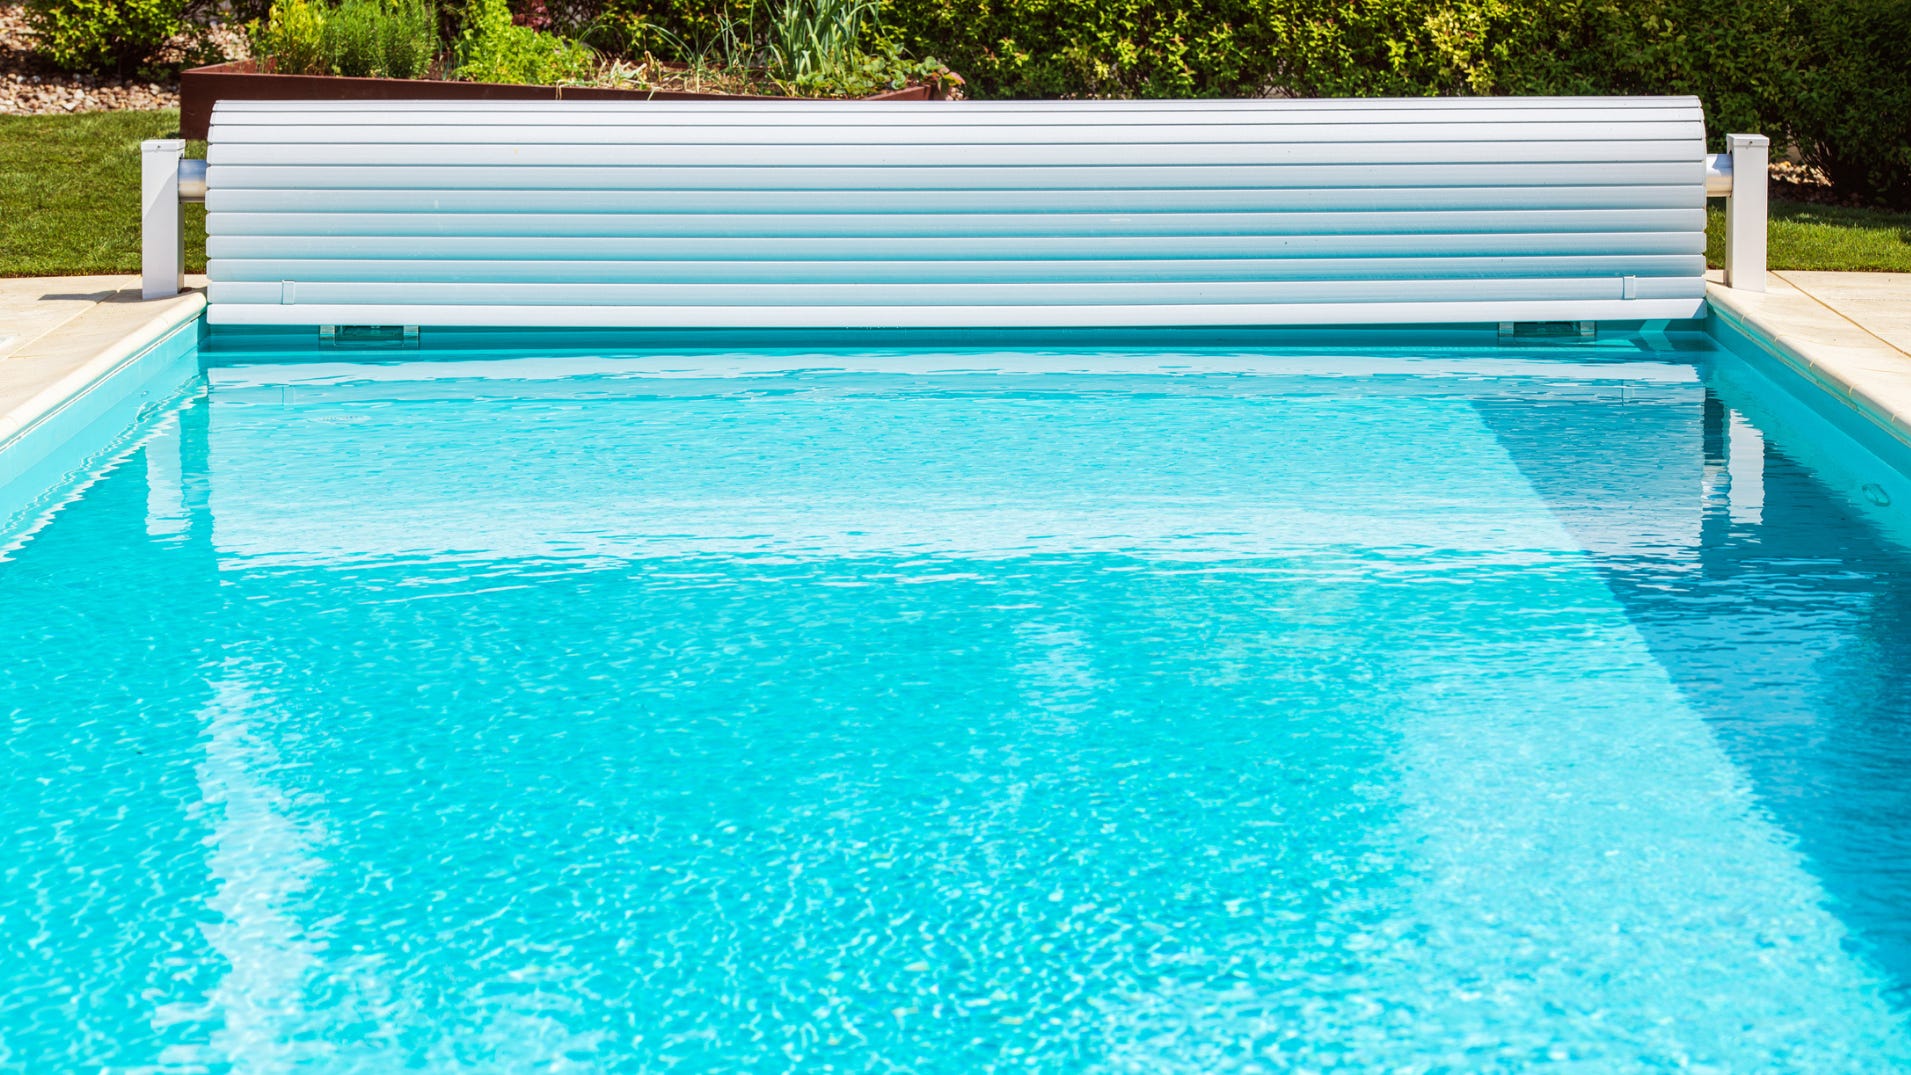 10 pool covers to protect your backyard oasis before winter sets in